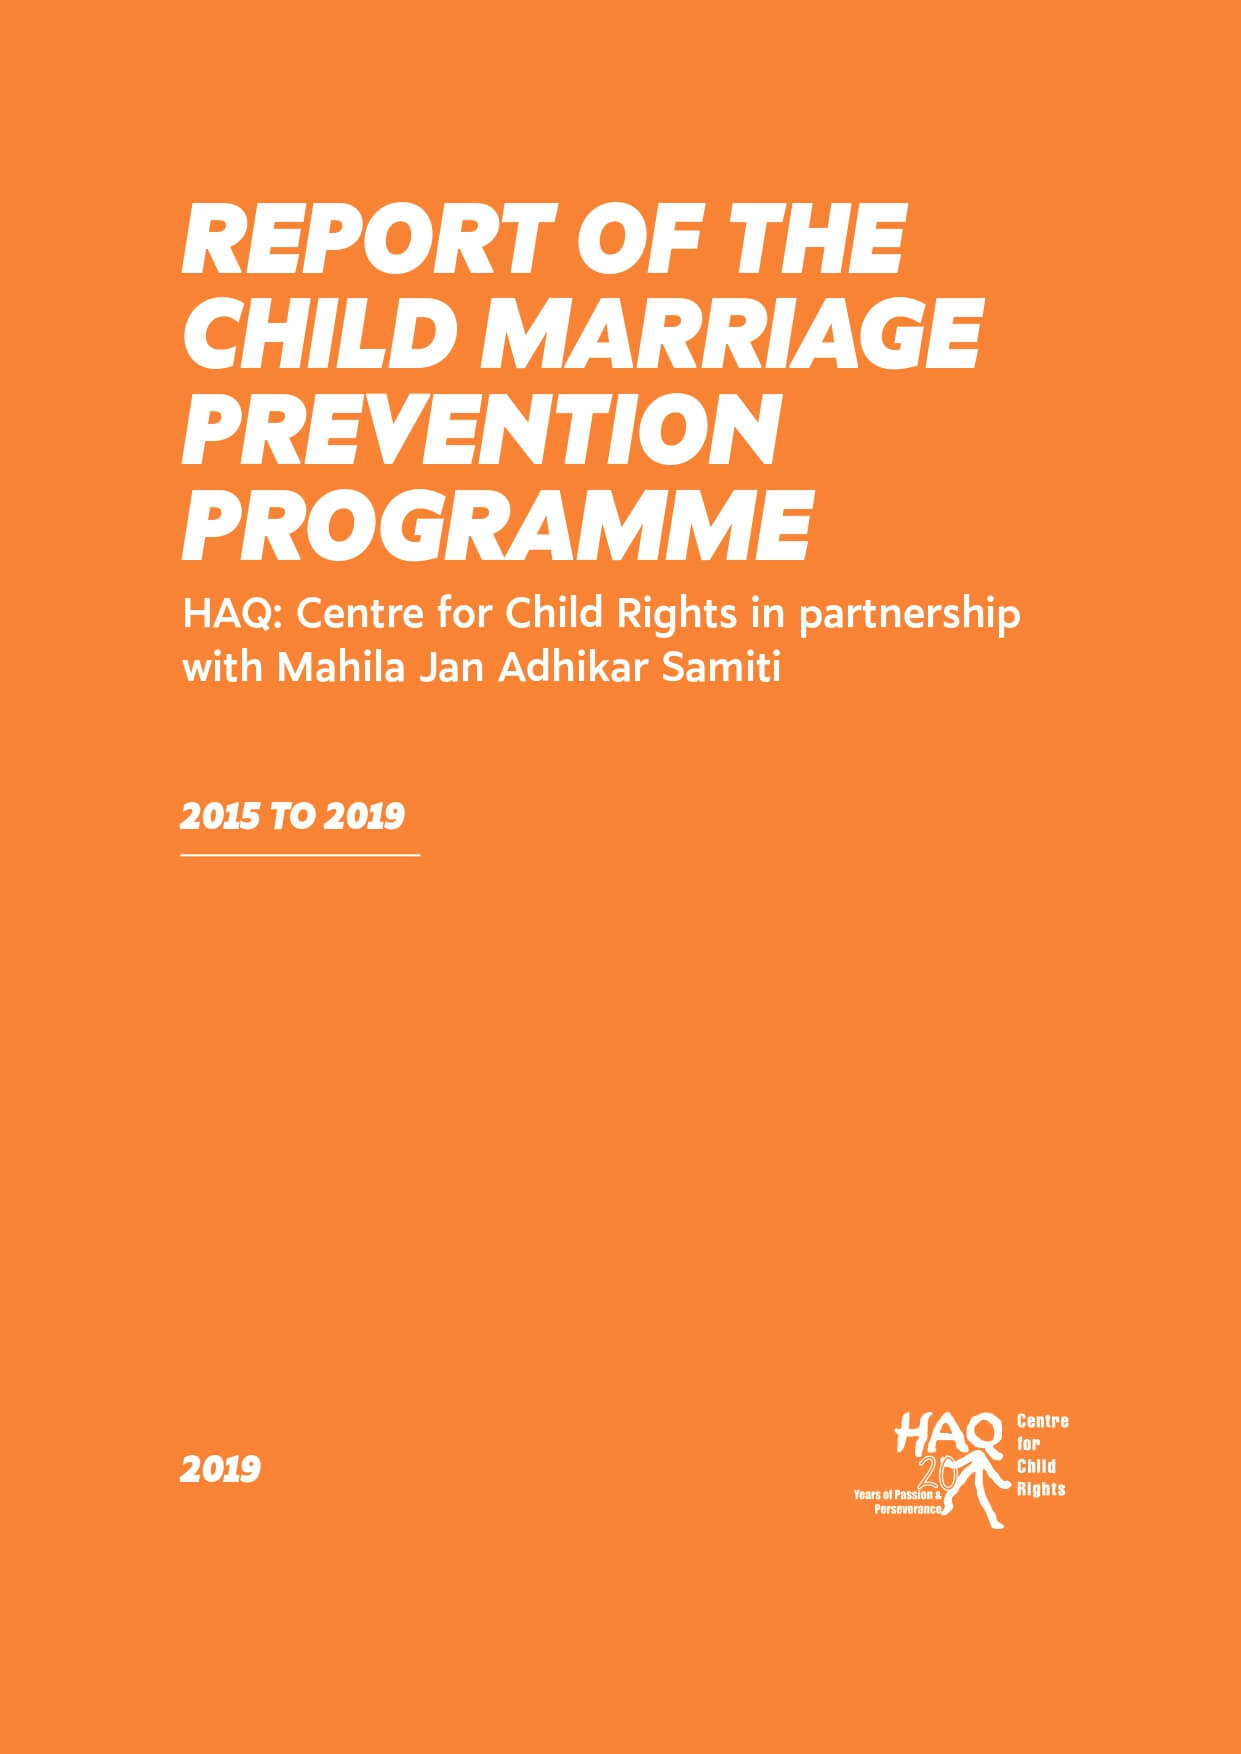 Report of the Child Marriage Prevention Programme 2015 to 2019